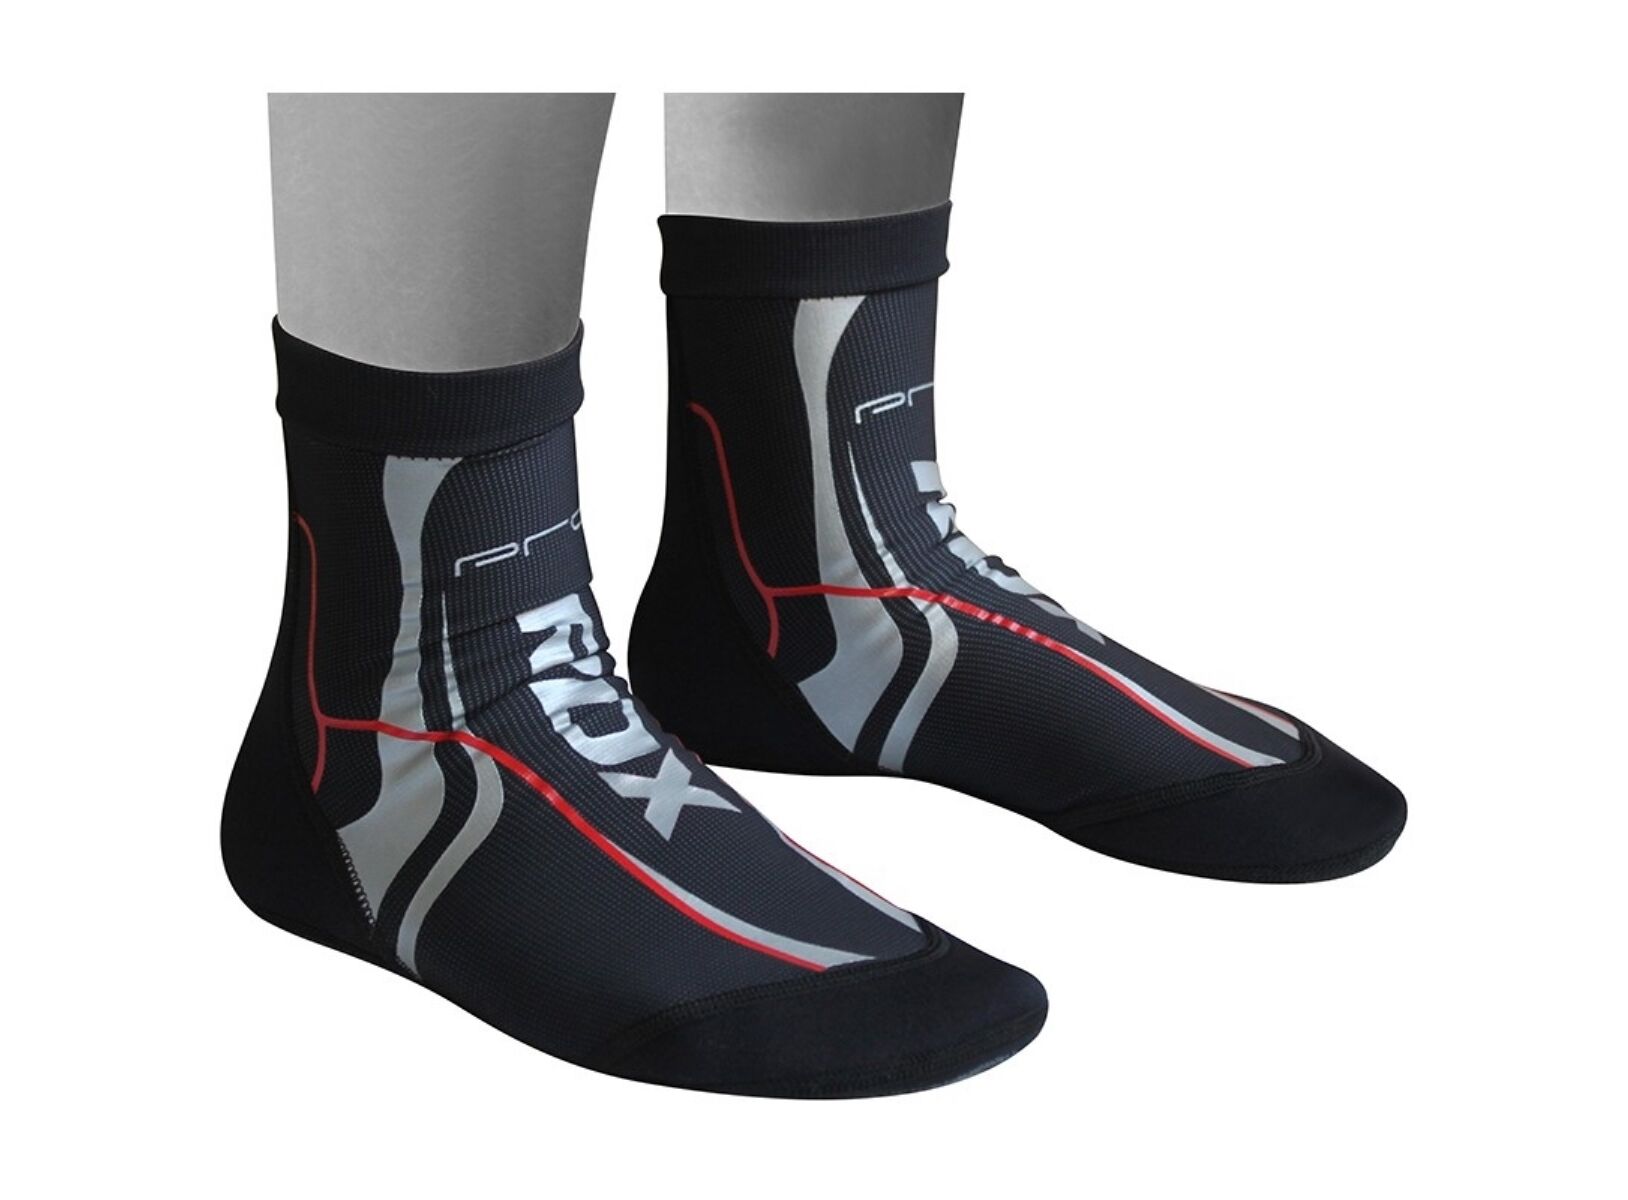 Protections :: Ankle protector :: RDX S1 MMA Grip Socks - Combat Sport best  MMA Shop in Switzerland